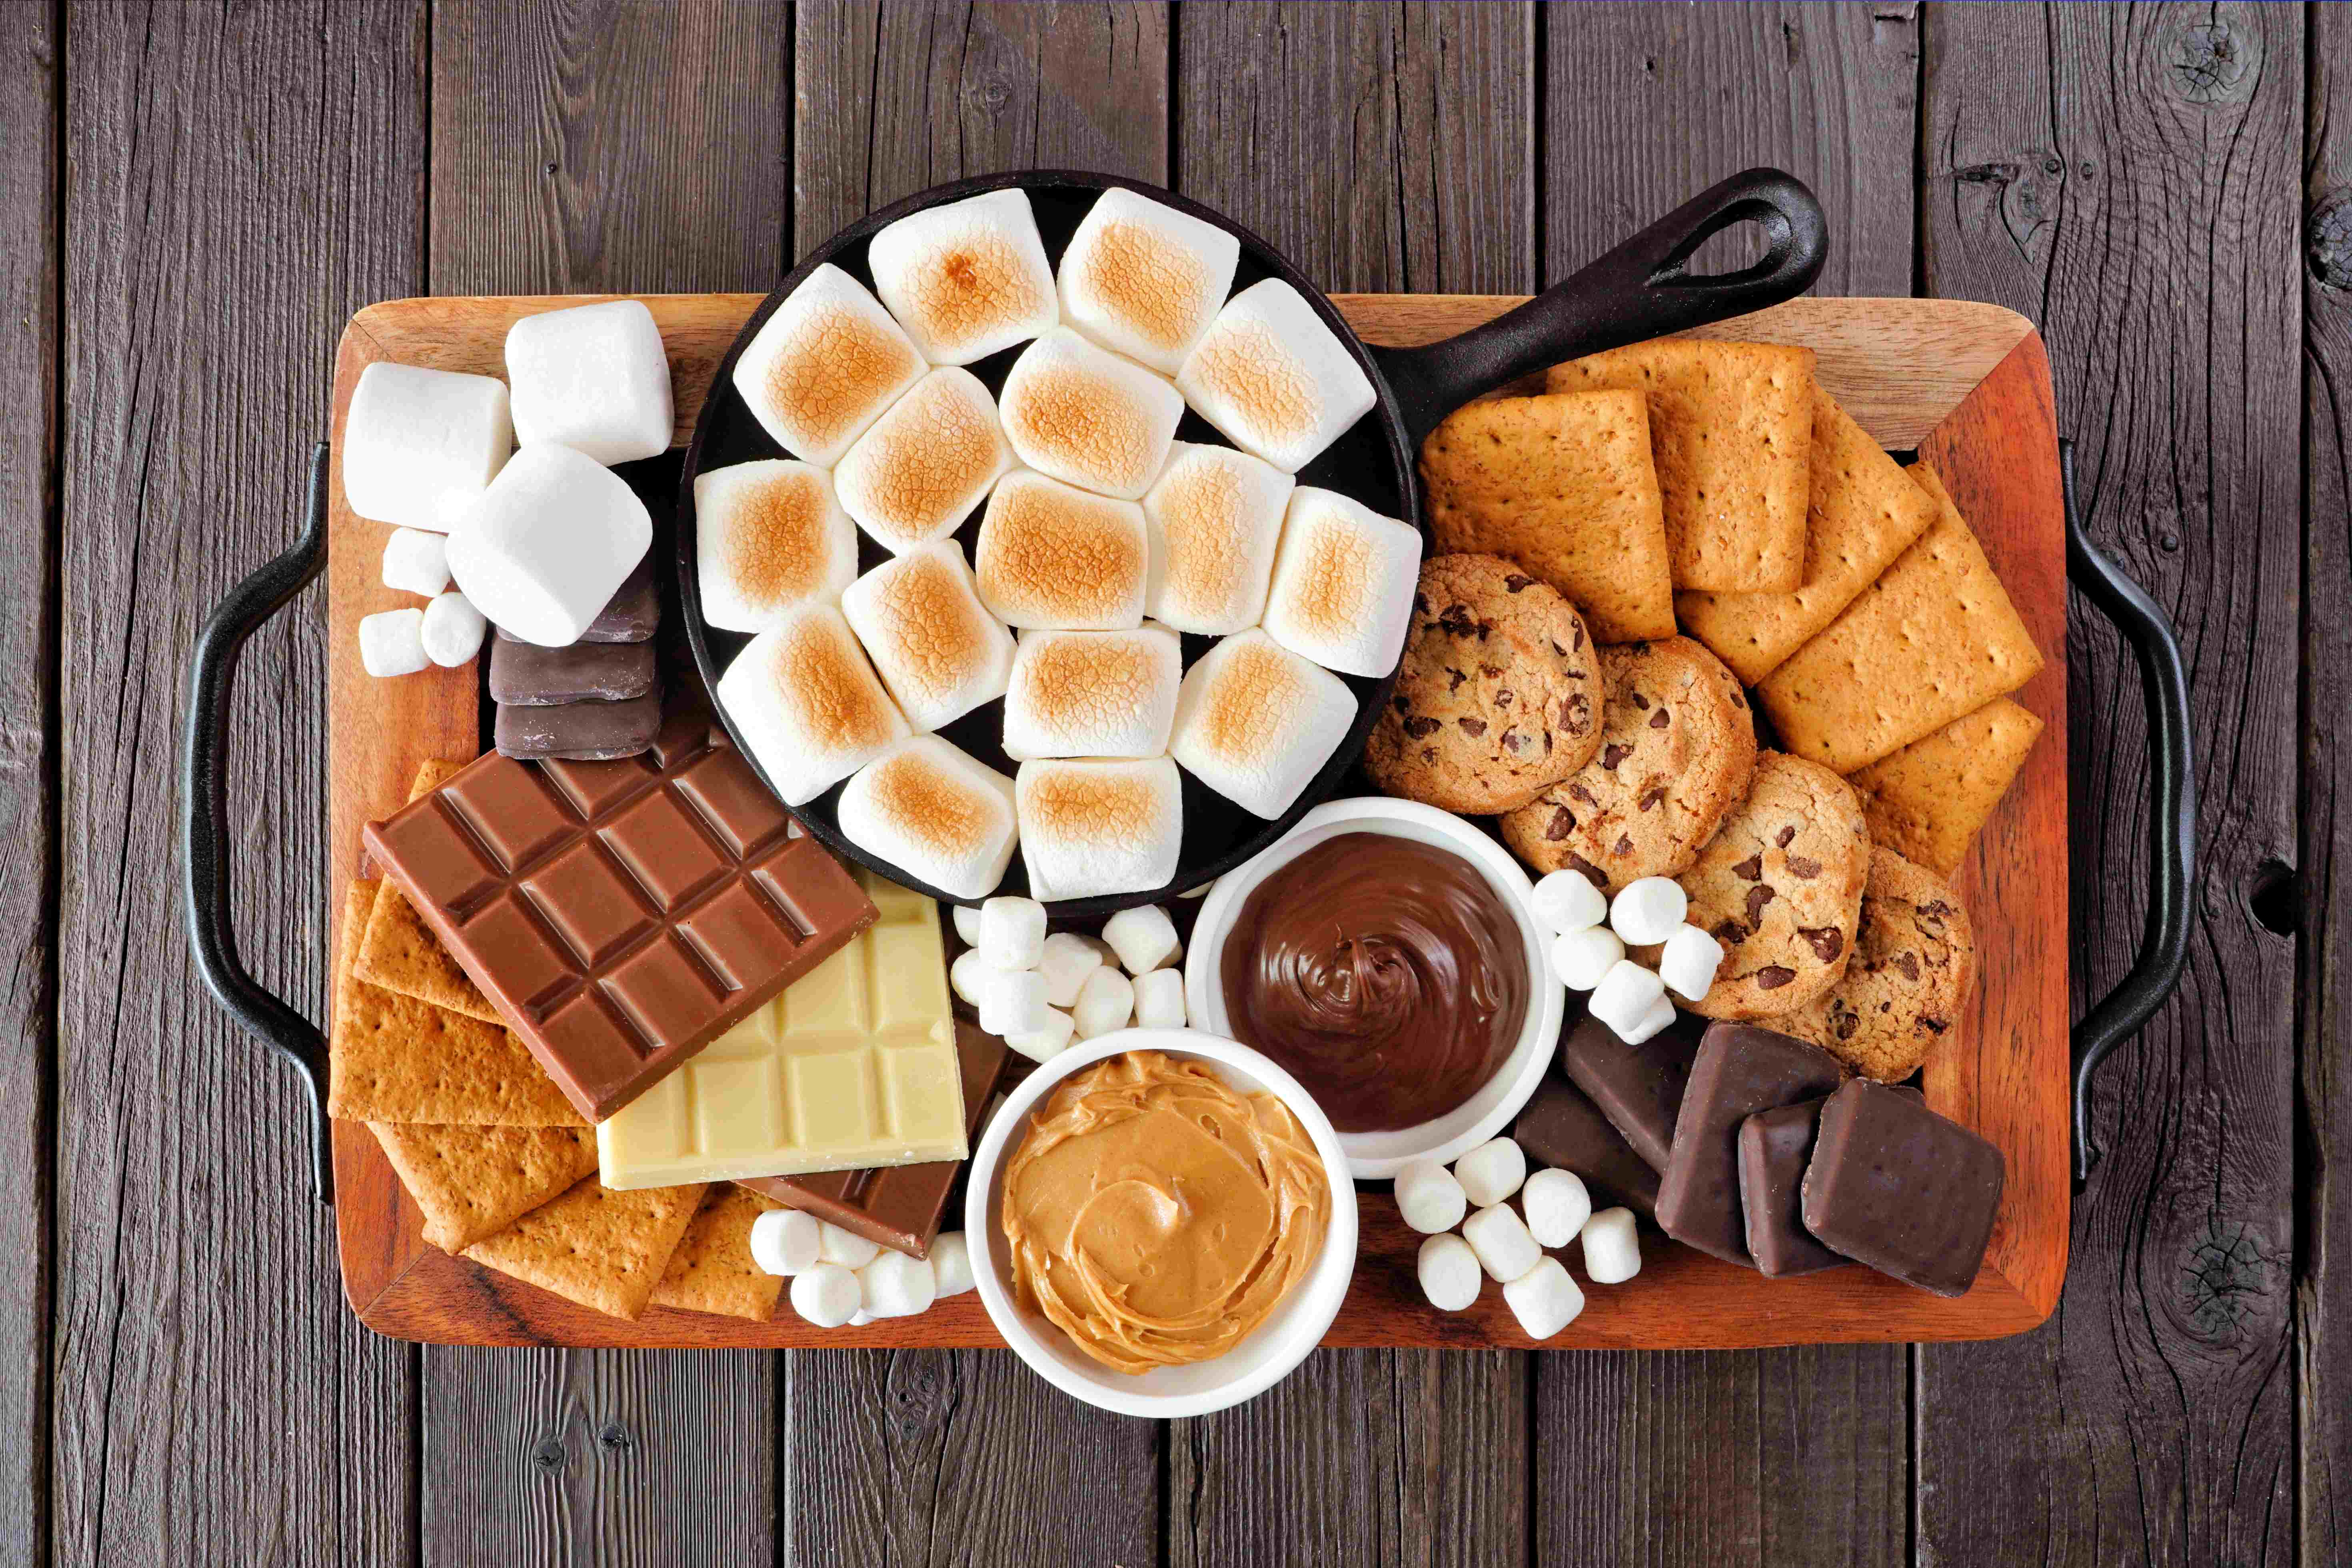 Everything you need to make s’mores at your next backyard barbecue